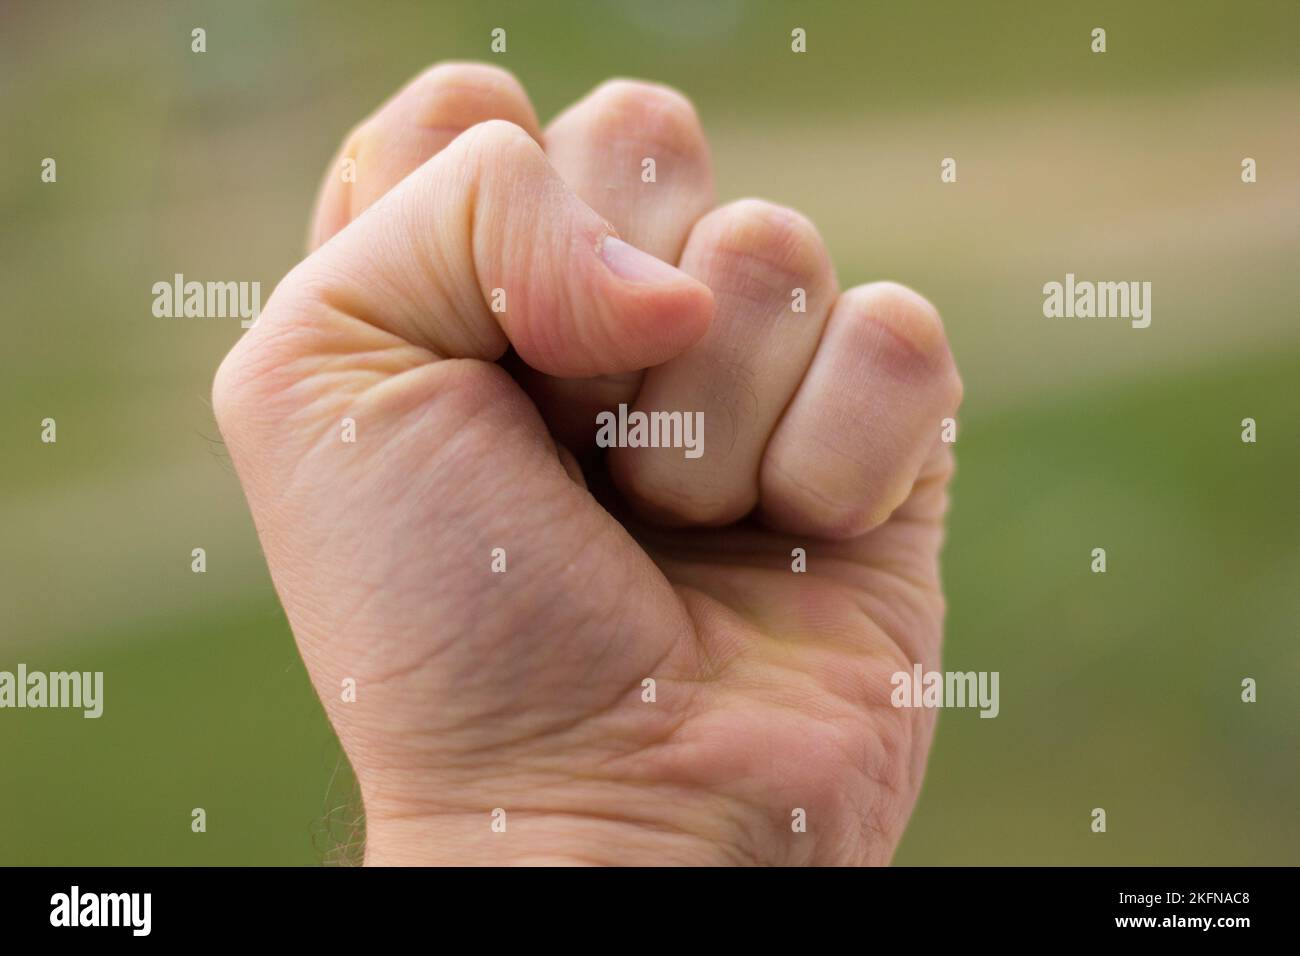 Hand clenching a fist on a green background close-up Stock Photo